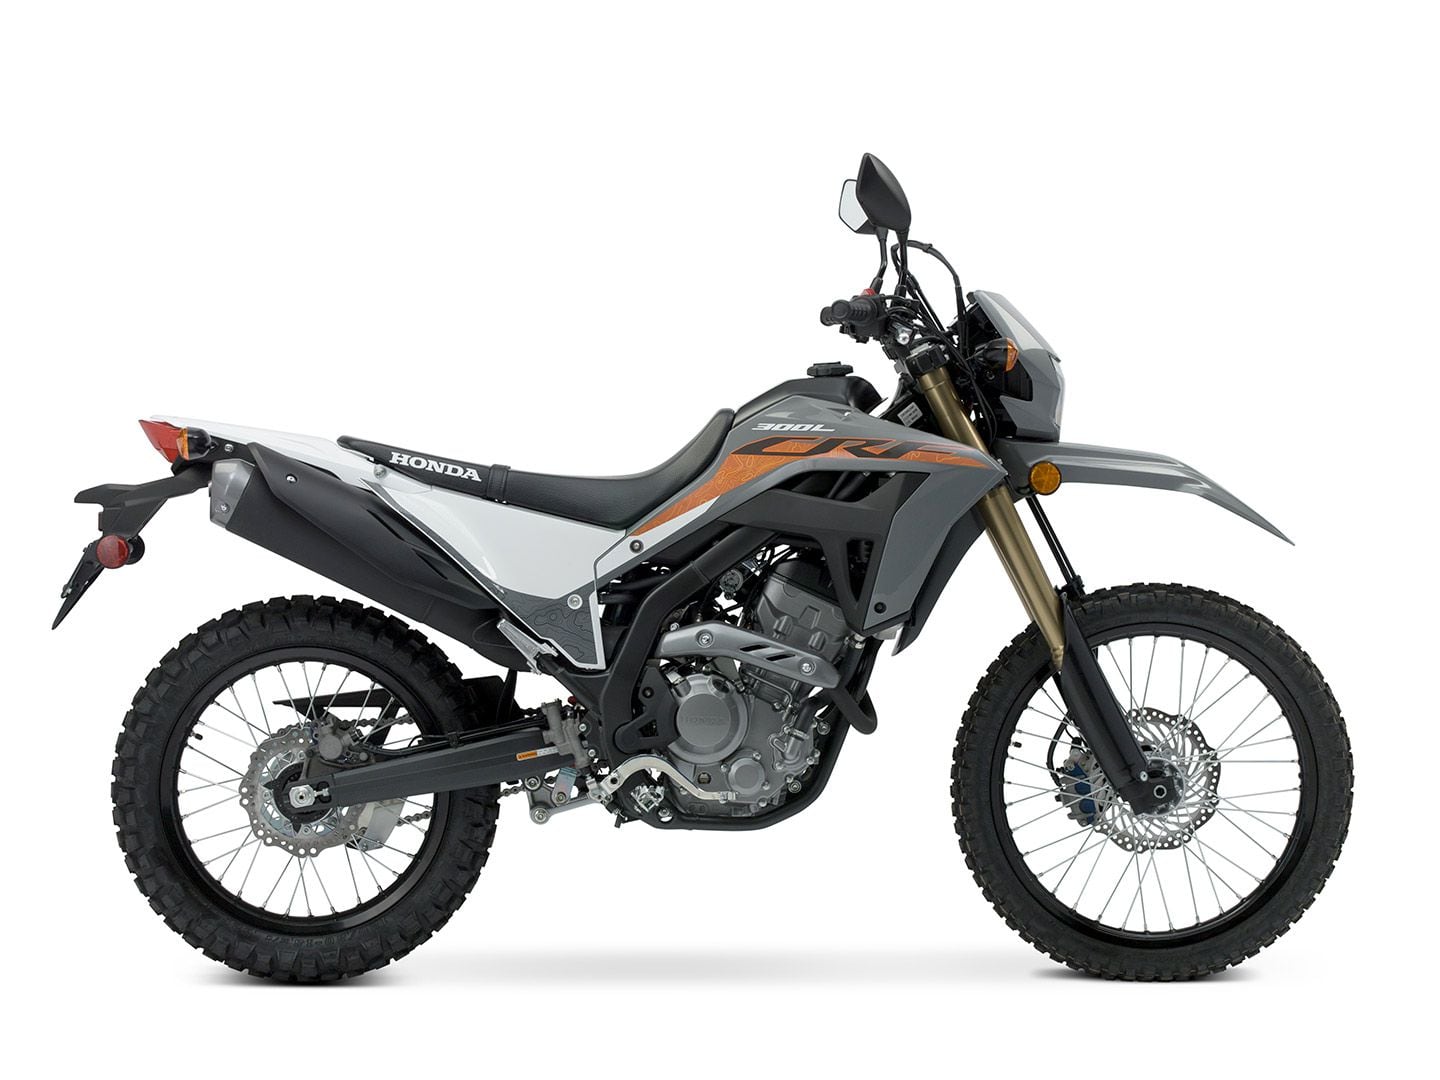 The seat height of the CRF300LS is 2 inches shorter than the standard CRF300L.